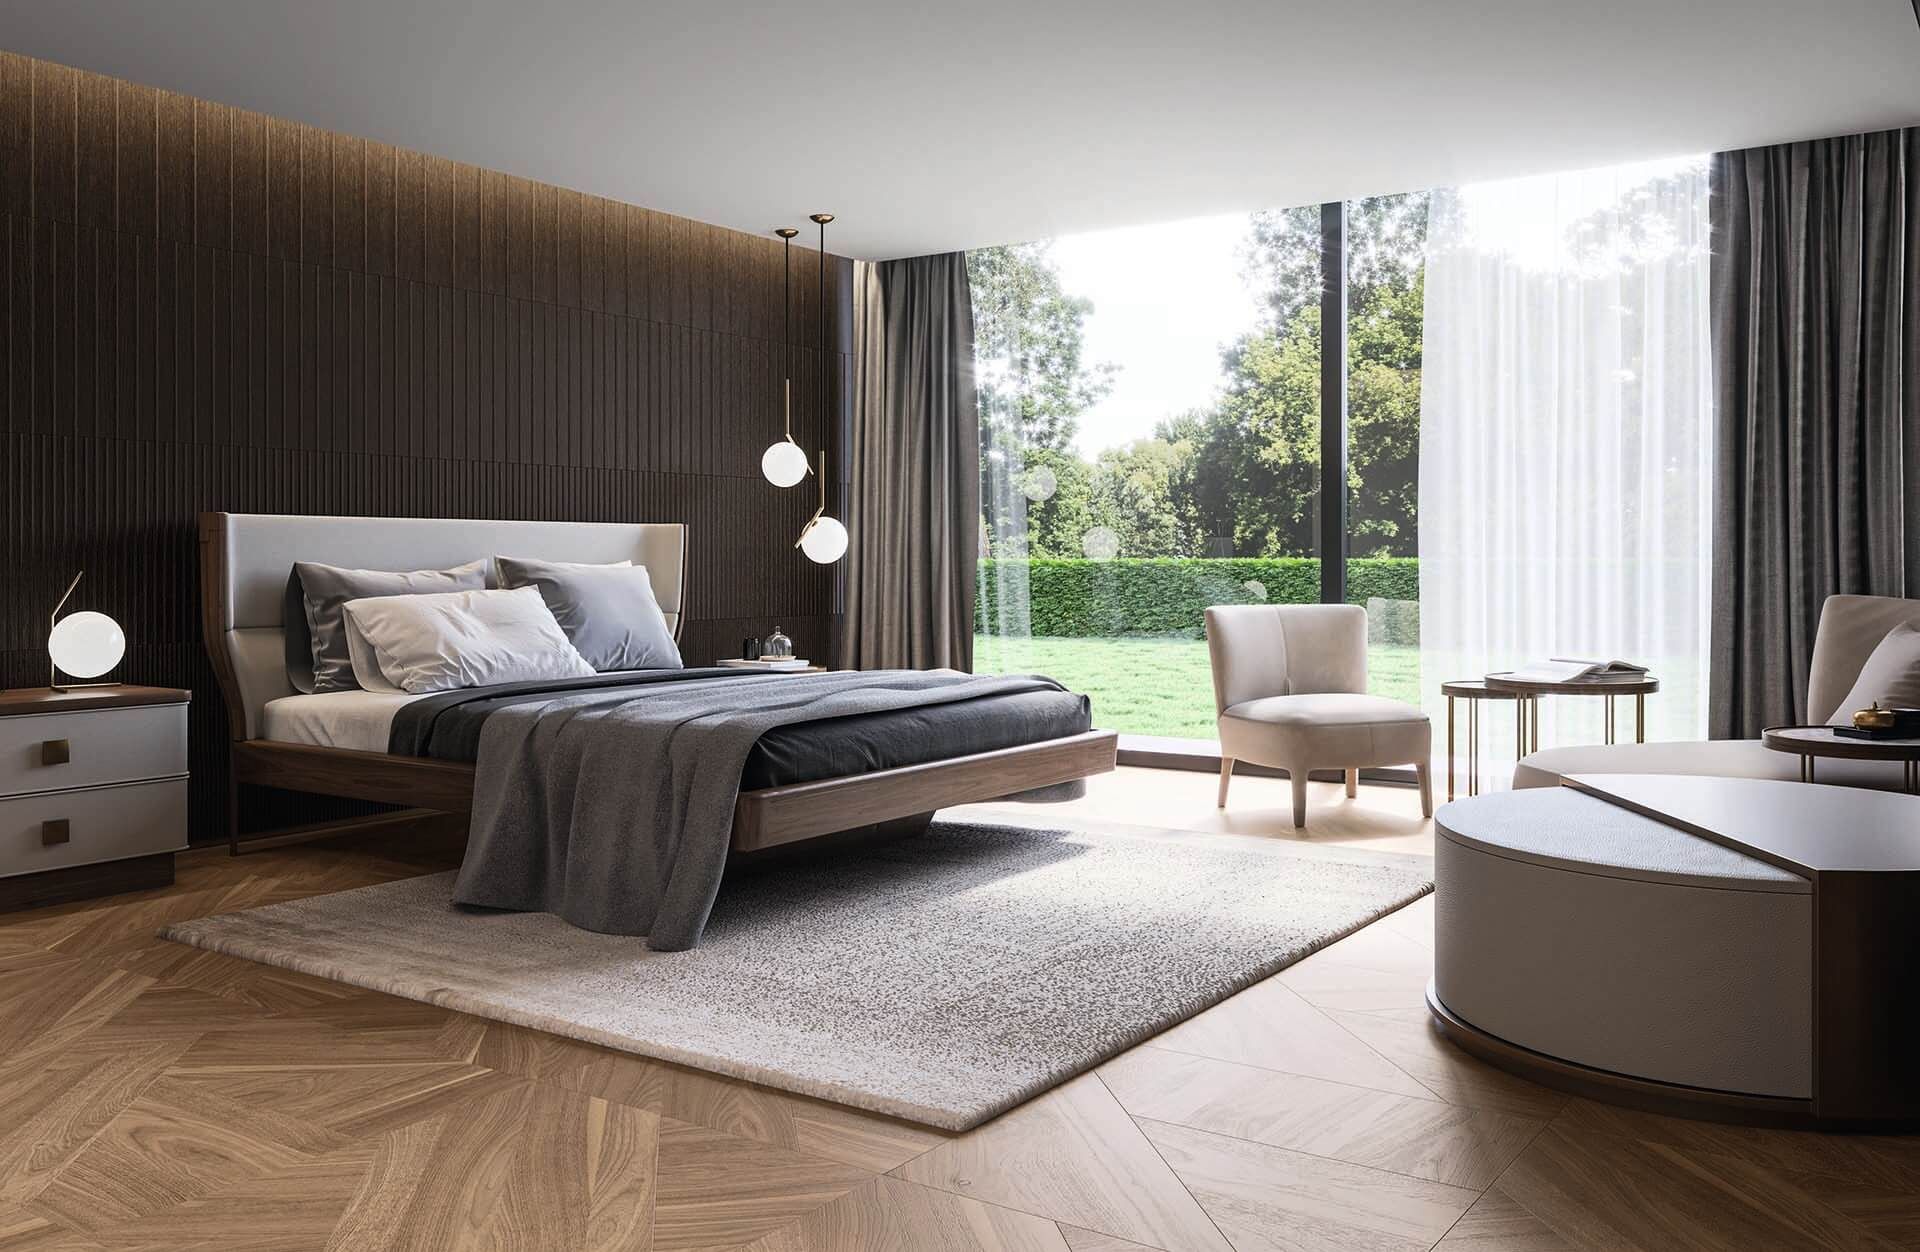 Bedroom with solid wood floor and bed - Wood Interiors